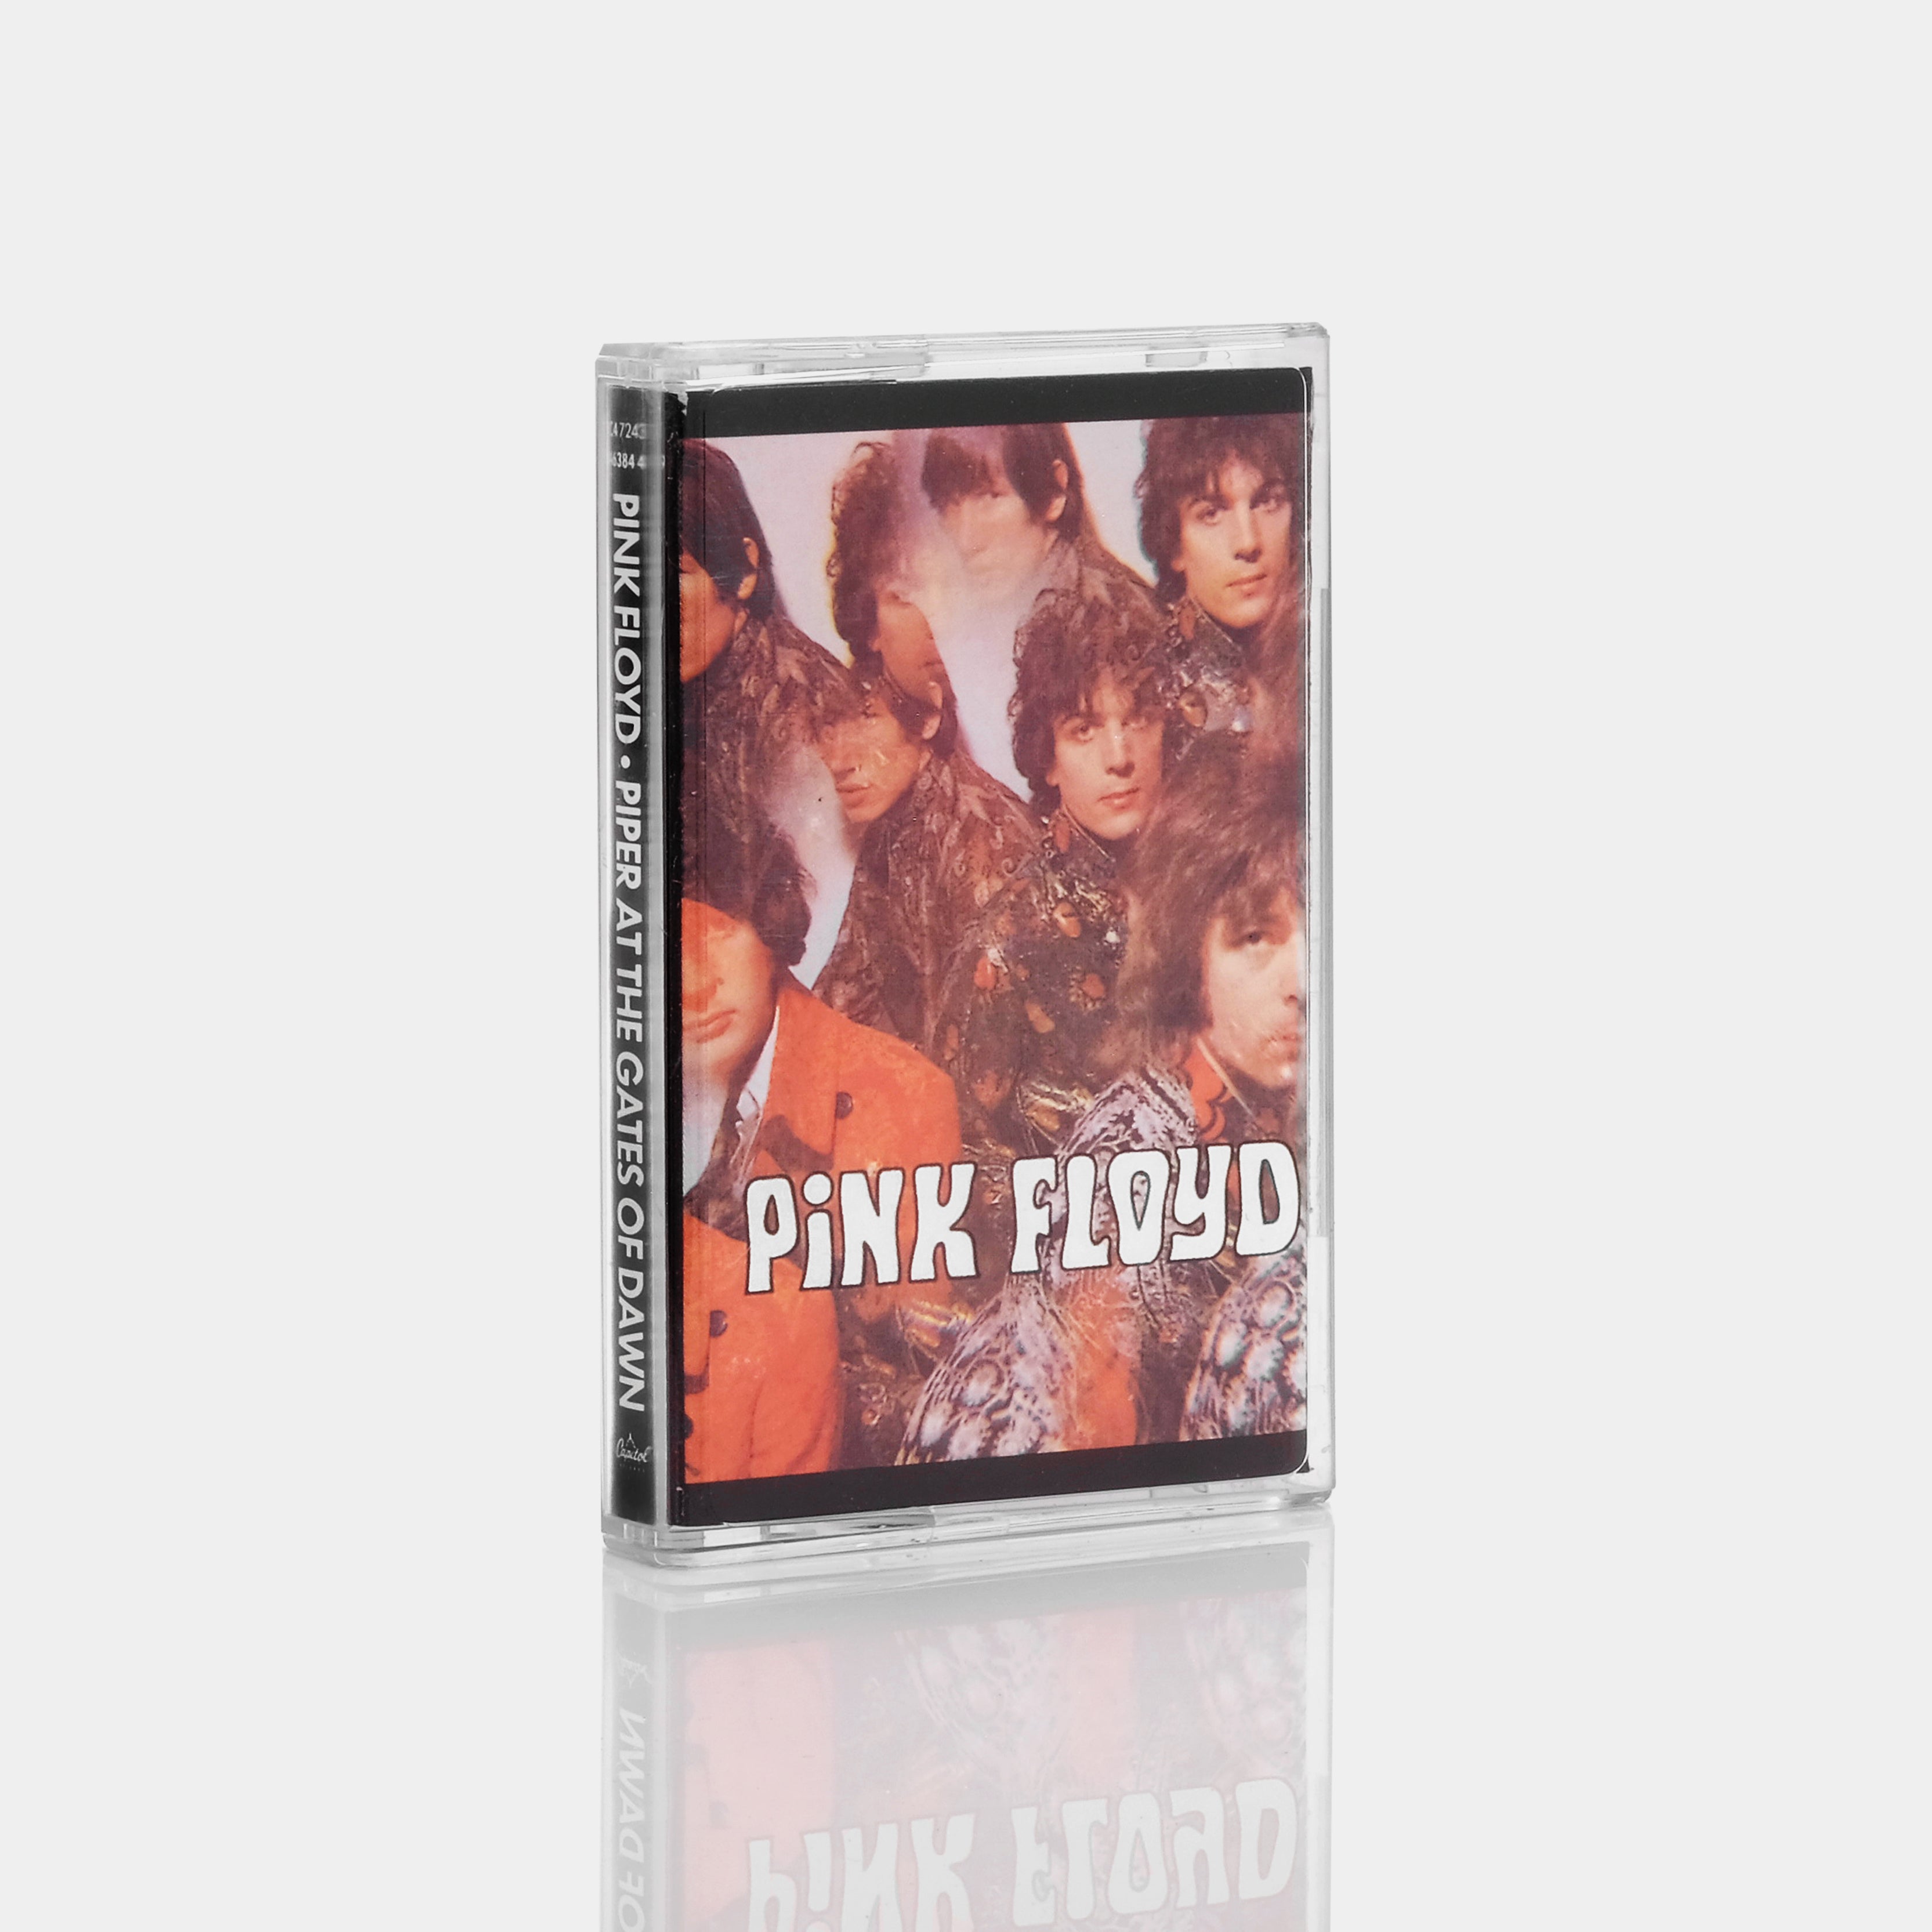 Pink Floyd - The Piper At The Gates Of Dawn Cassette Tape